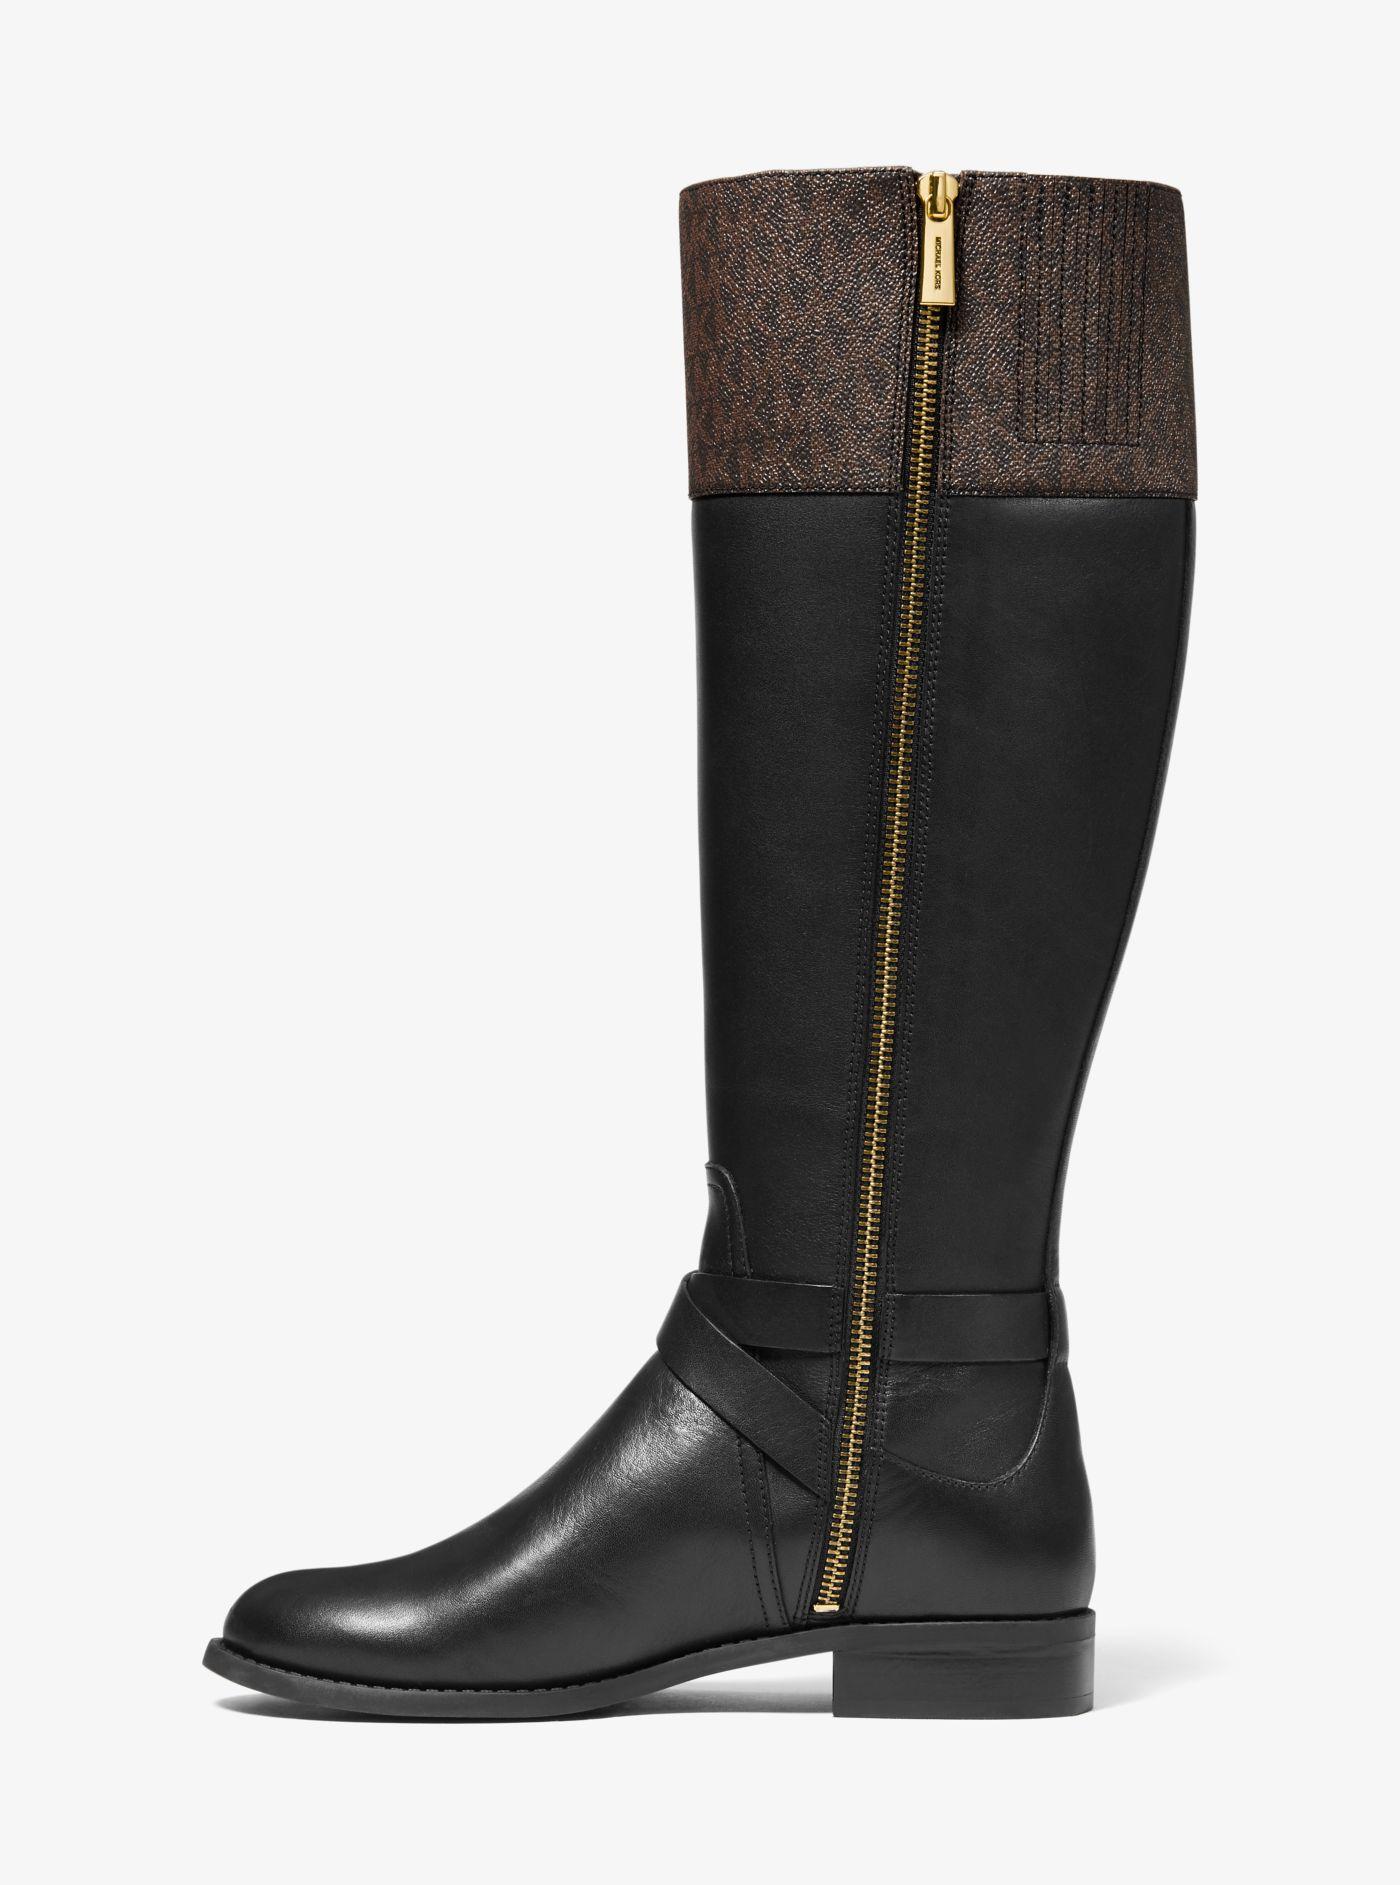 Michael Kors Kincaid Leather And Logo Riding Boot in Black - Lyst